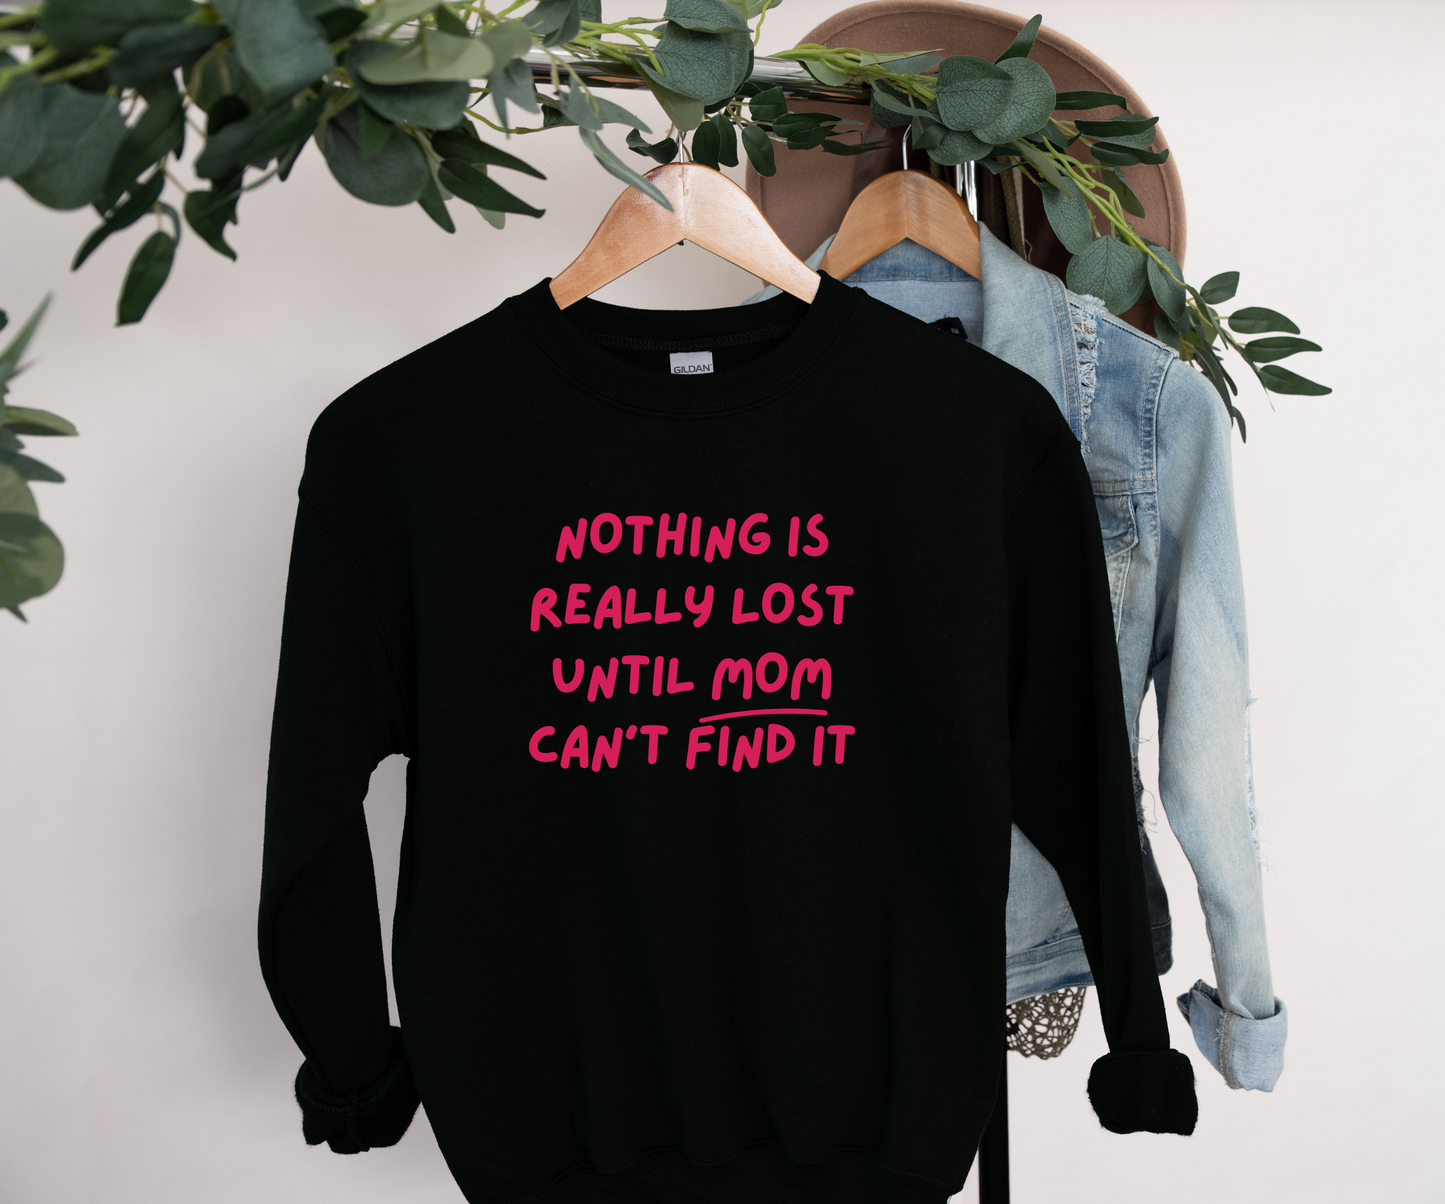 Nothing Is Really Lost Funny Shirt - Hilarious Gift for Moms Sweatshirt